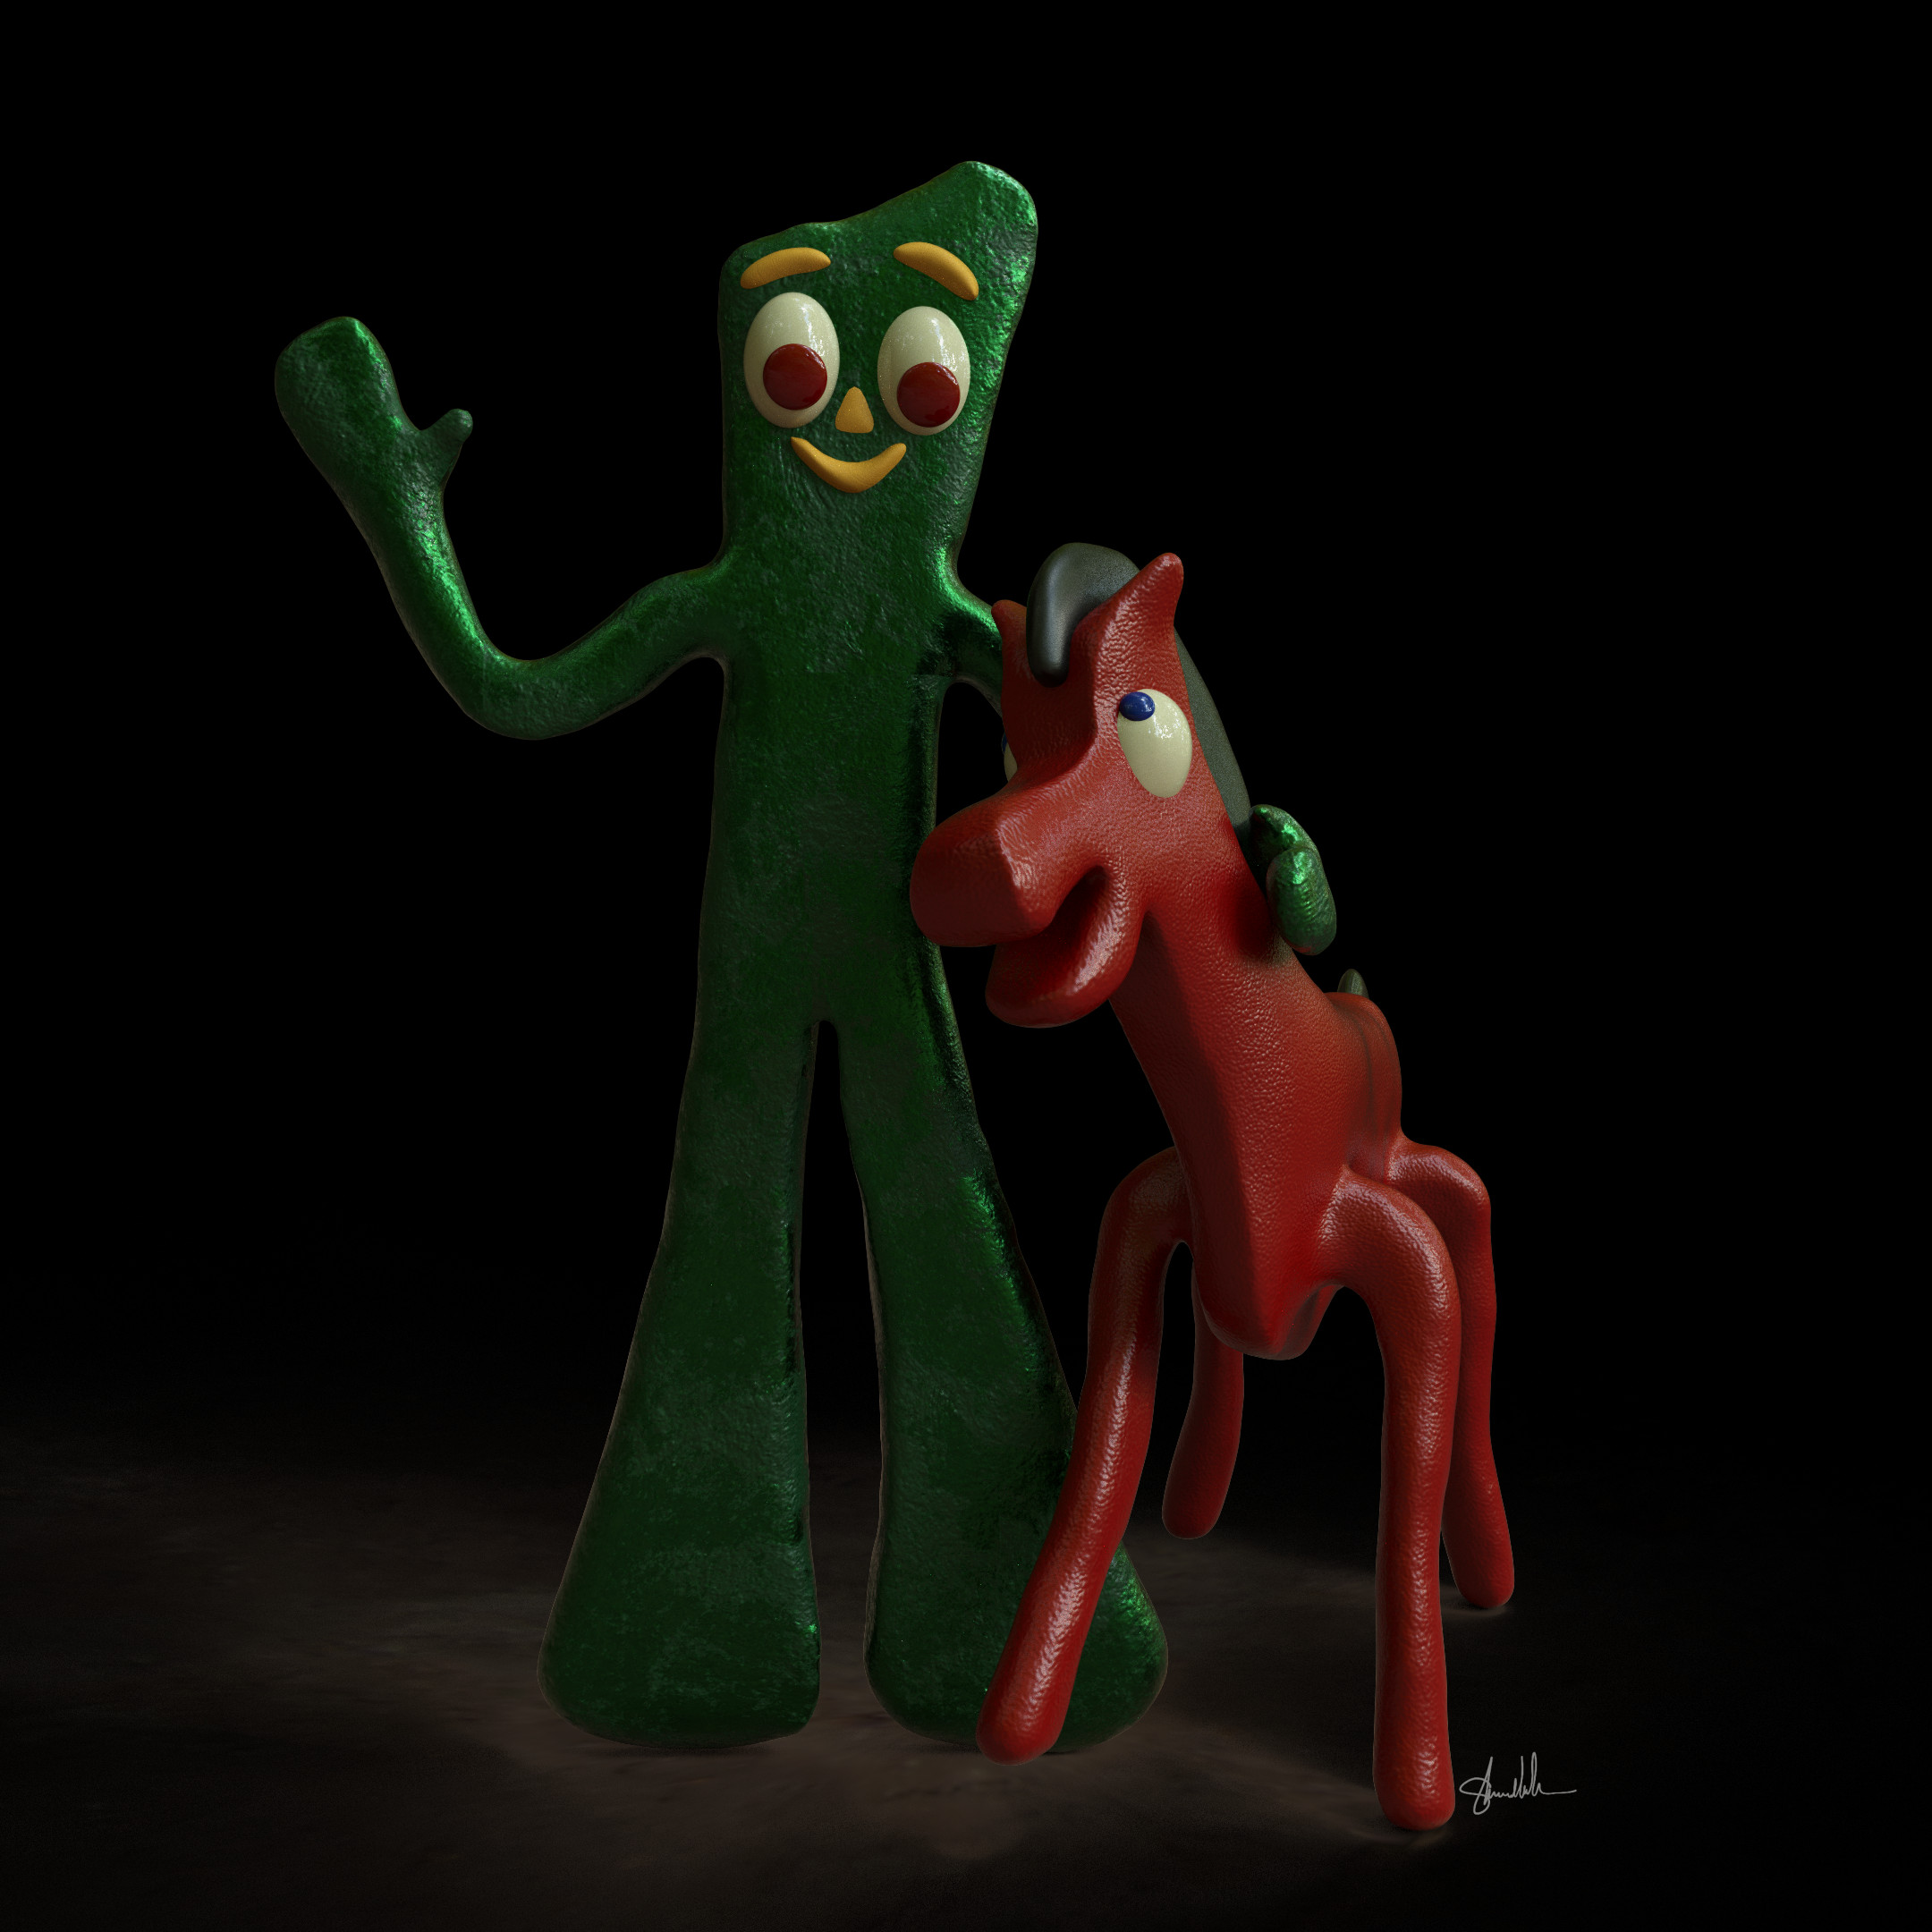 Texture on Gumby needs to be fixed